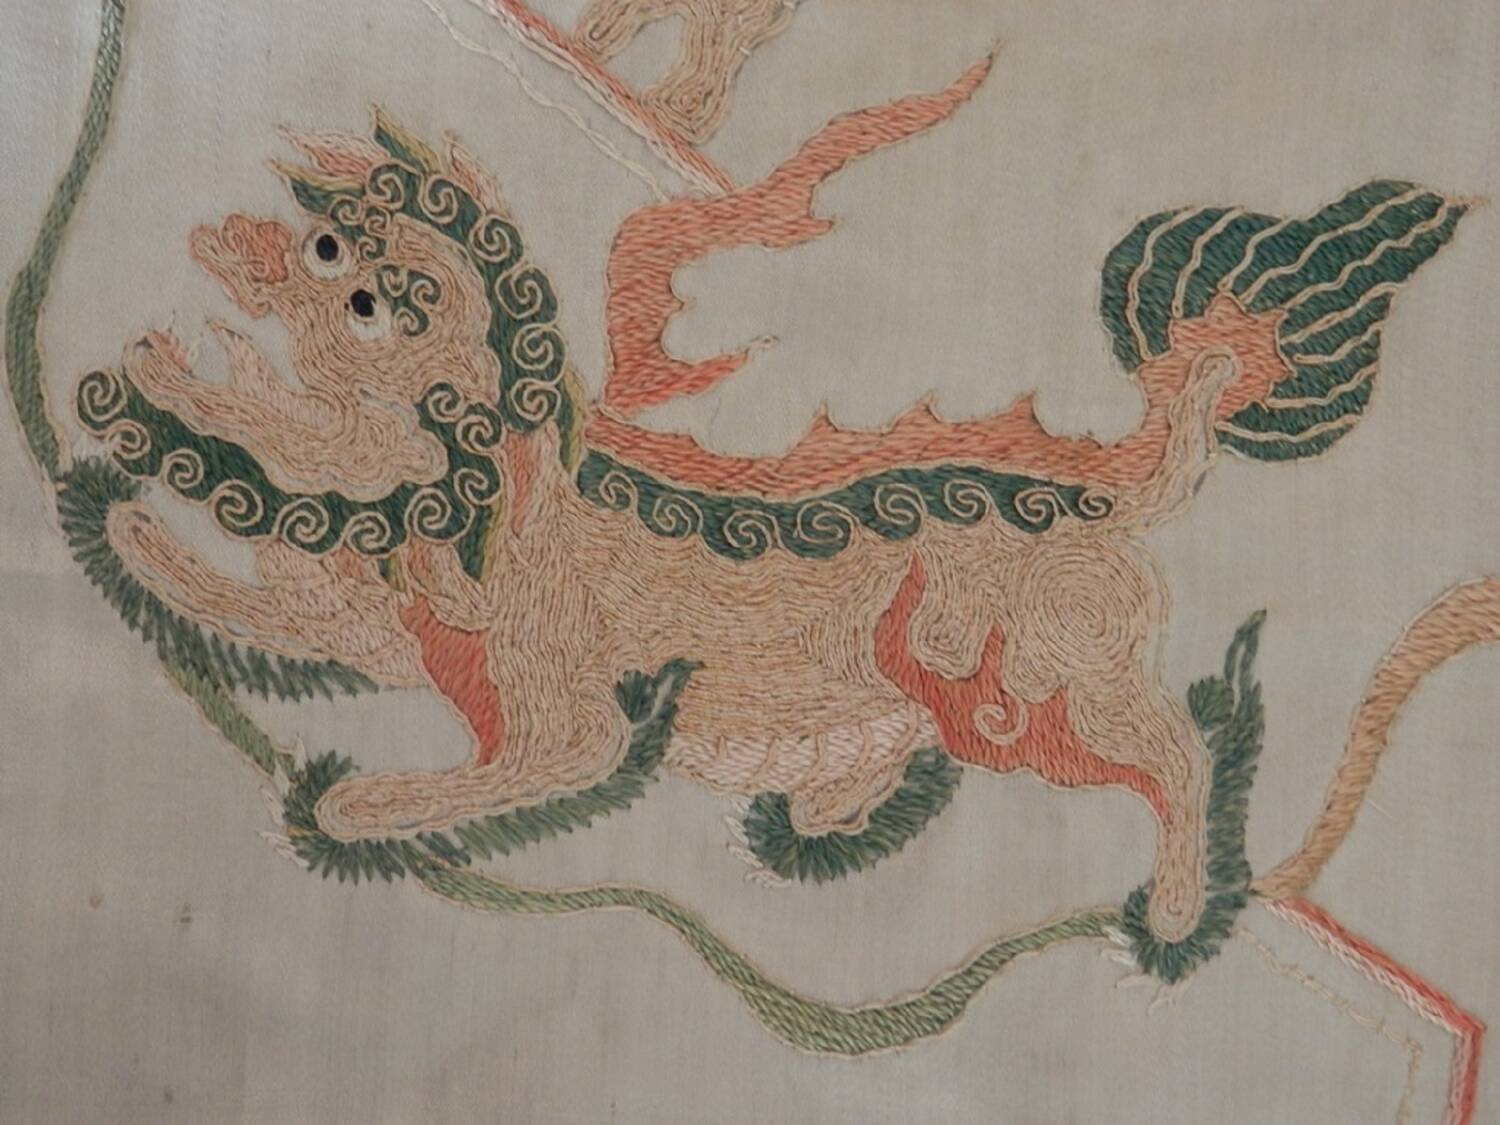 A close-up image of an embroidered Chinese-style lion on a silk panel. The lion is sewn in green, red and orange thread.